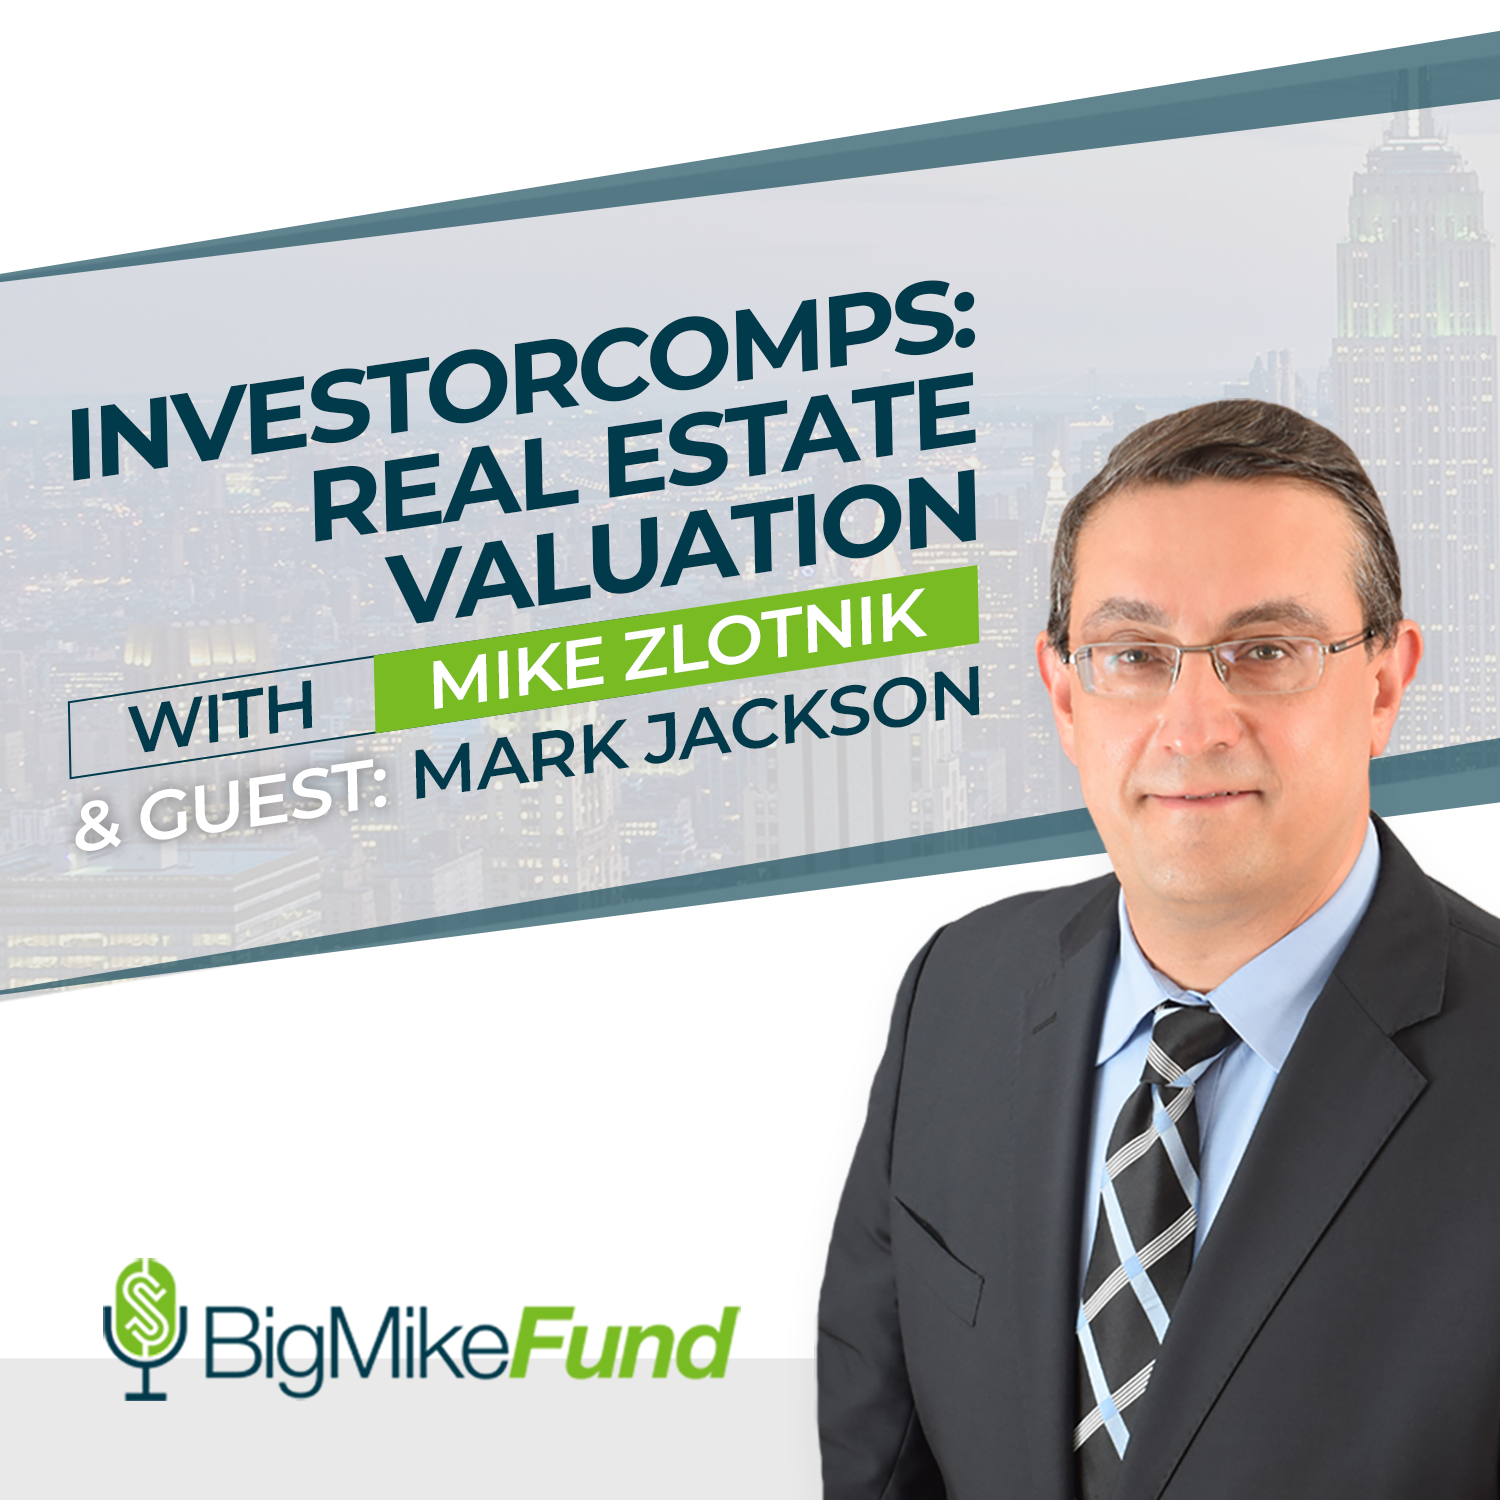 102: InvestorComps: Real Estate Valuation with Mark Jackson